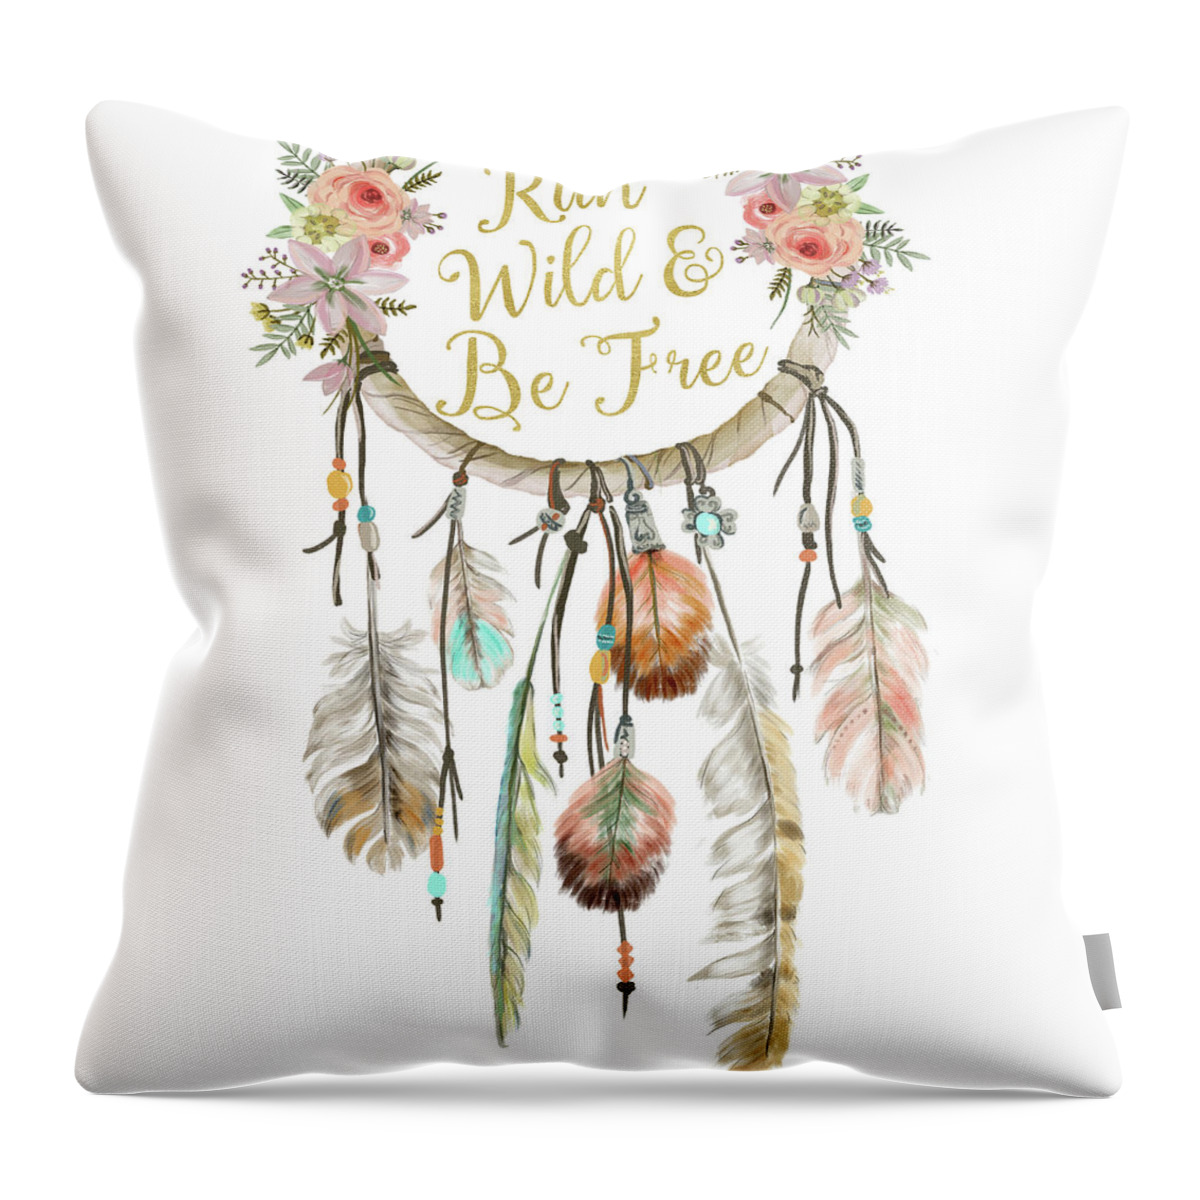 Boho Throw Pillow featuring the digital art Run Wild And Be Free Dreamcatcher Boho Feather Pillow by Pink Forest Cafe